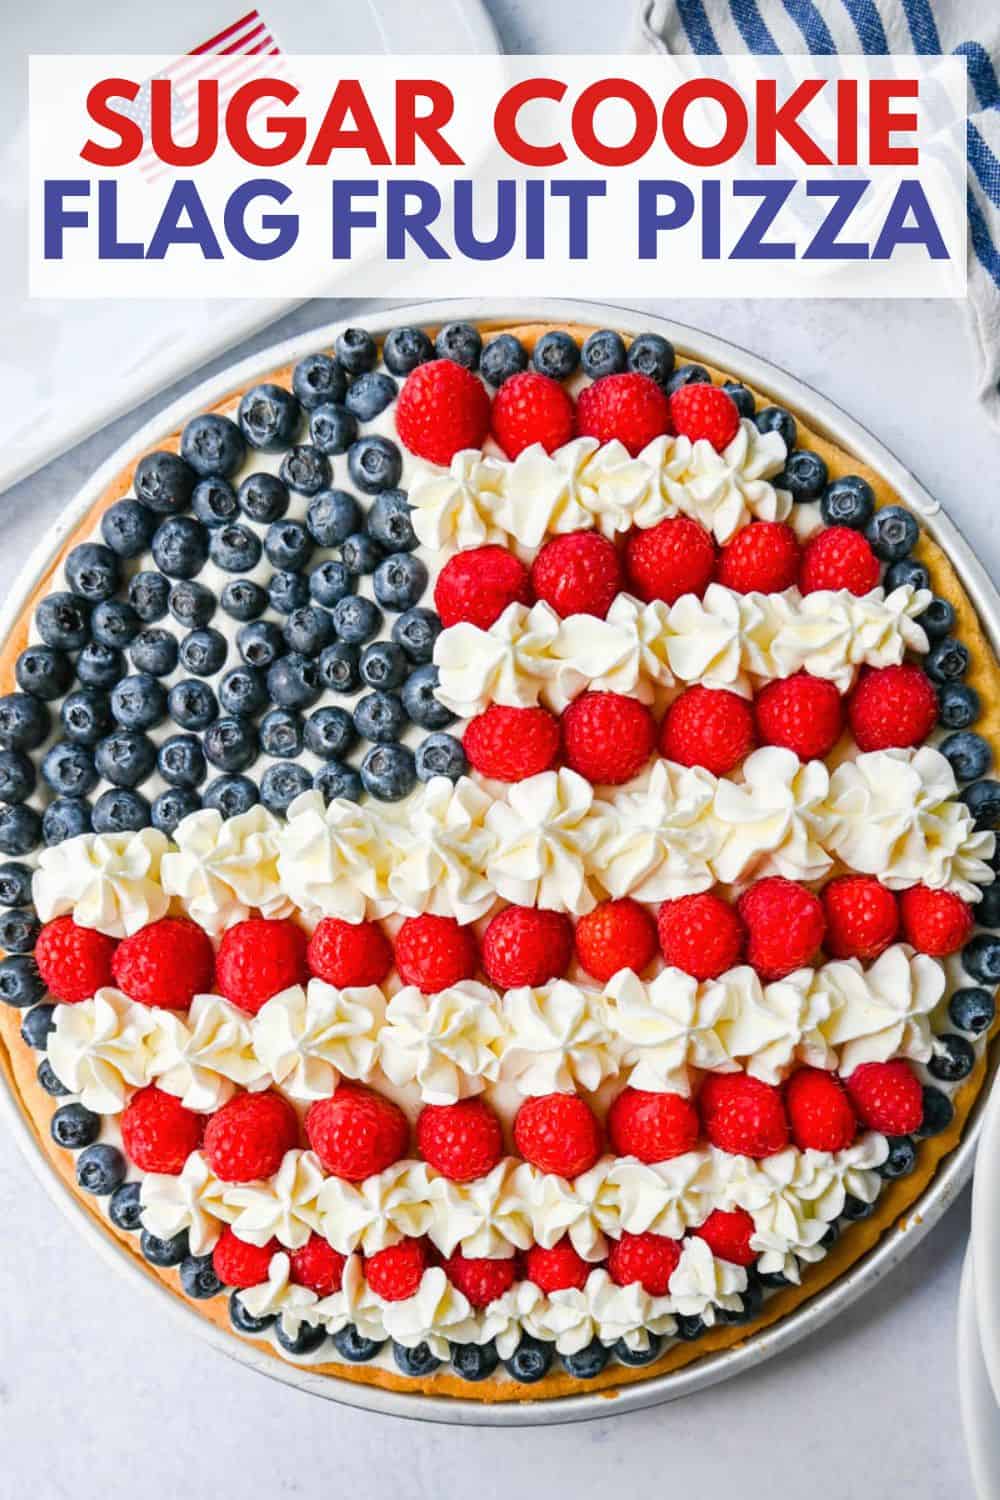 This flag sugar cookie fruit pizza is a festive, delicious, and beautiful patriotic 4th of July dessert featuring a homemade soft sugar cookie crust with a sweet vanilla cream cheese frosting topped with fresh raspberries, blueberries, and homemade whipped cream.